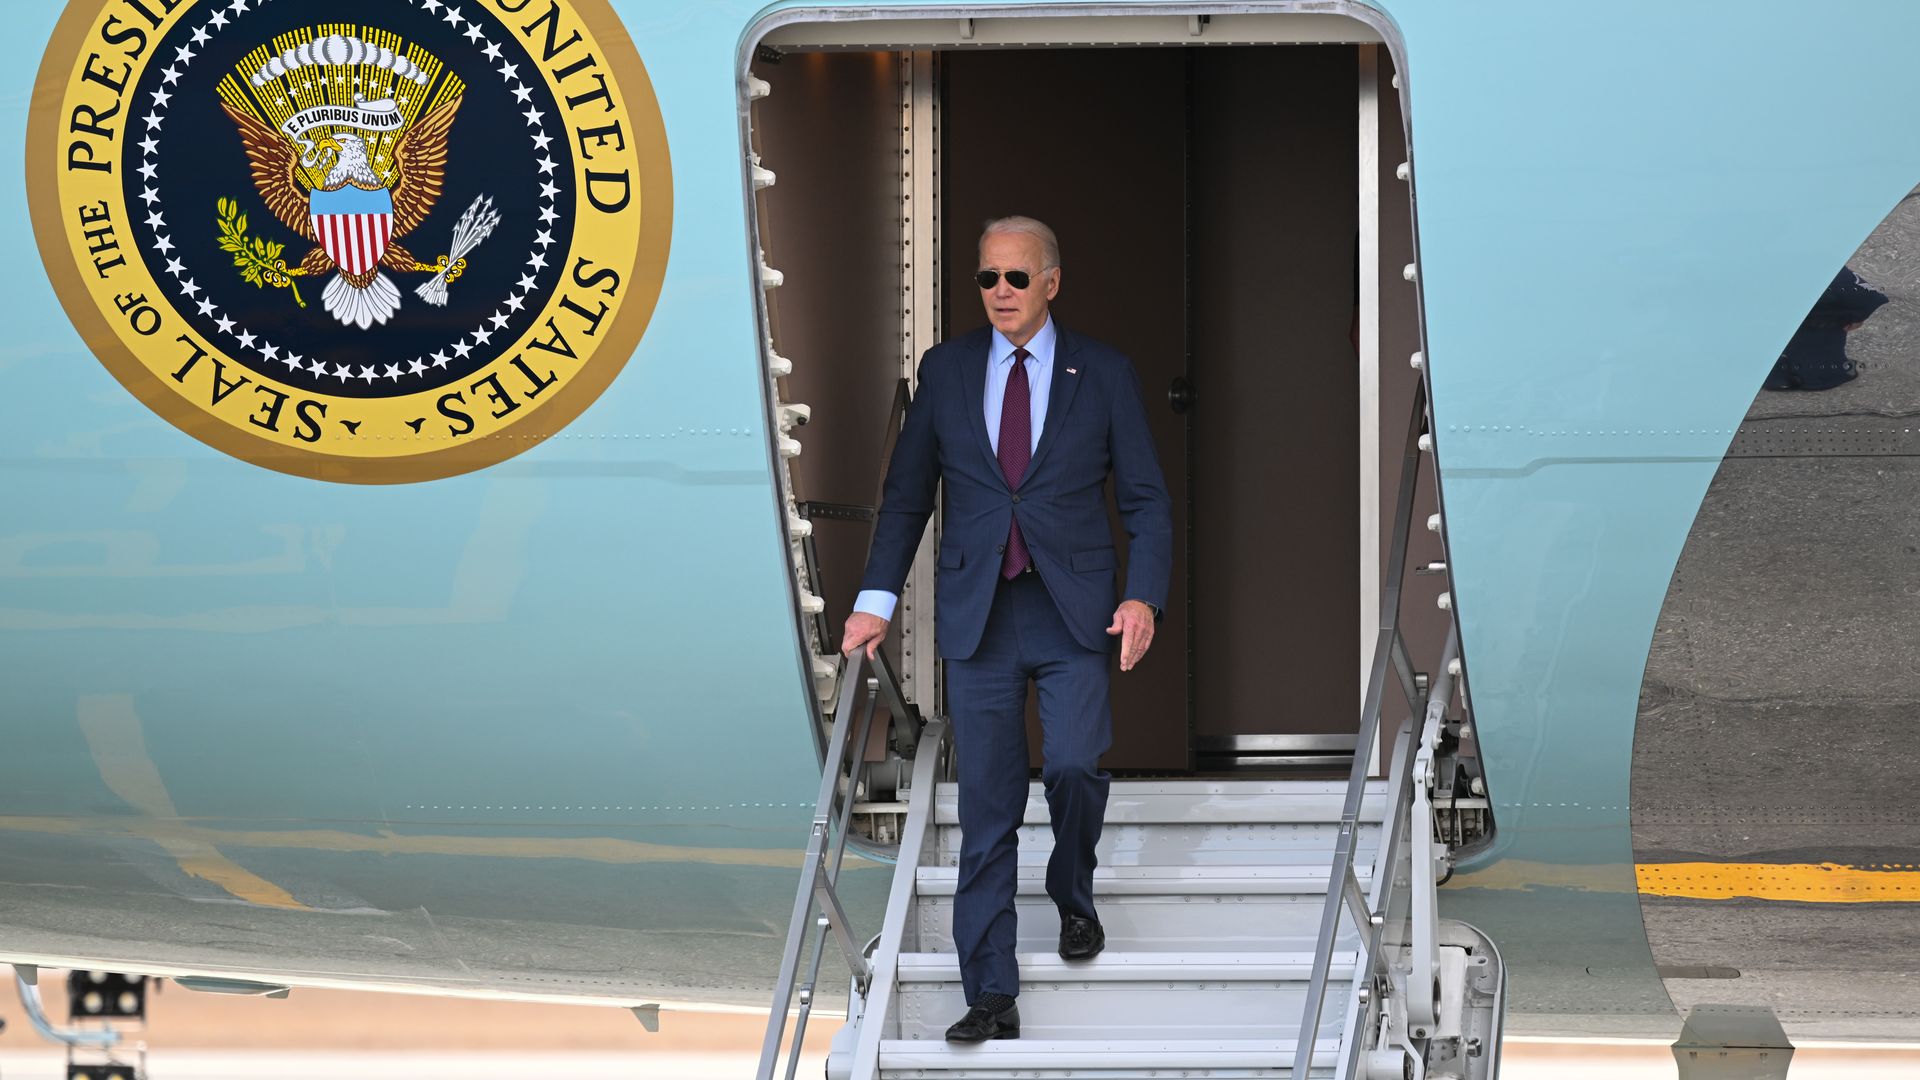 President Biden exits Air Force One by walking down a short staircase.